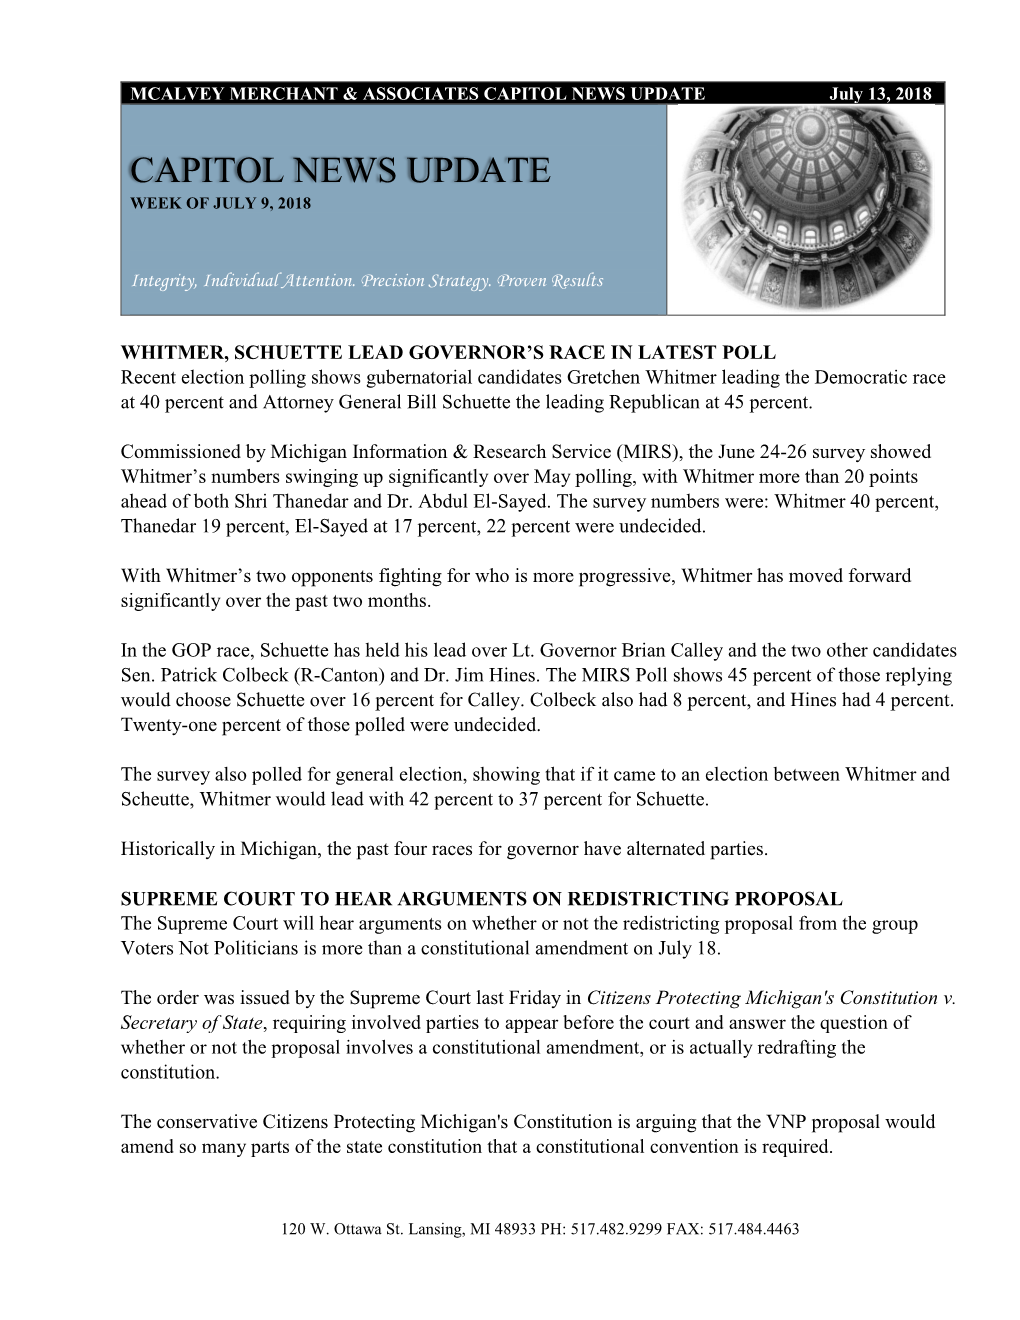 CAPITOL NEWS UPDATE July 13, 2018